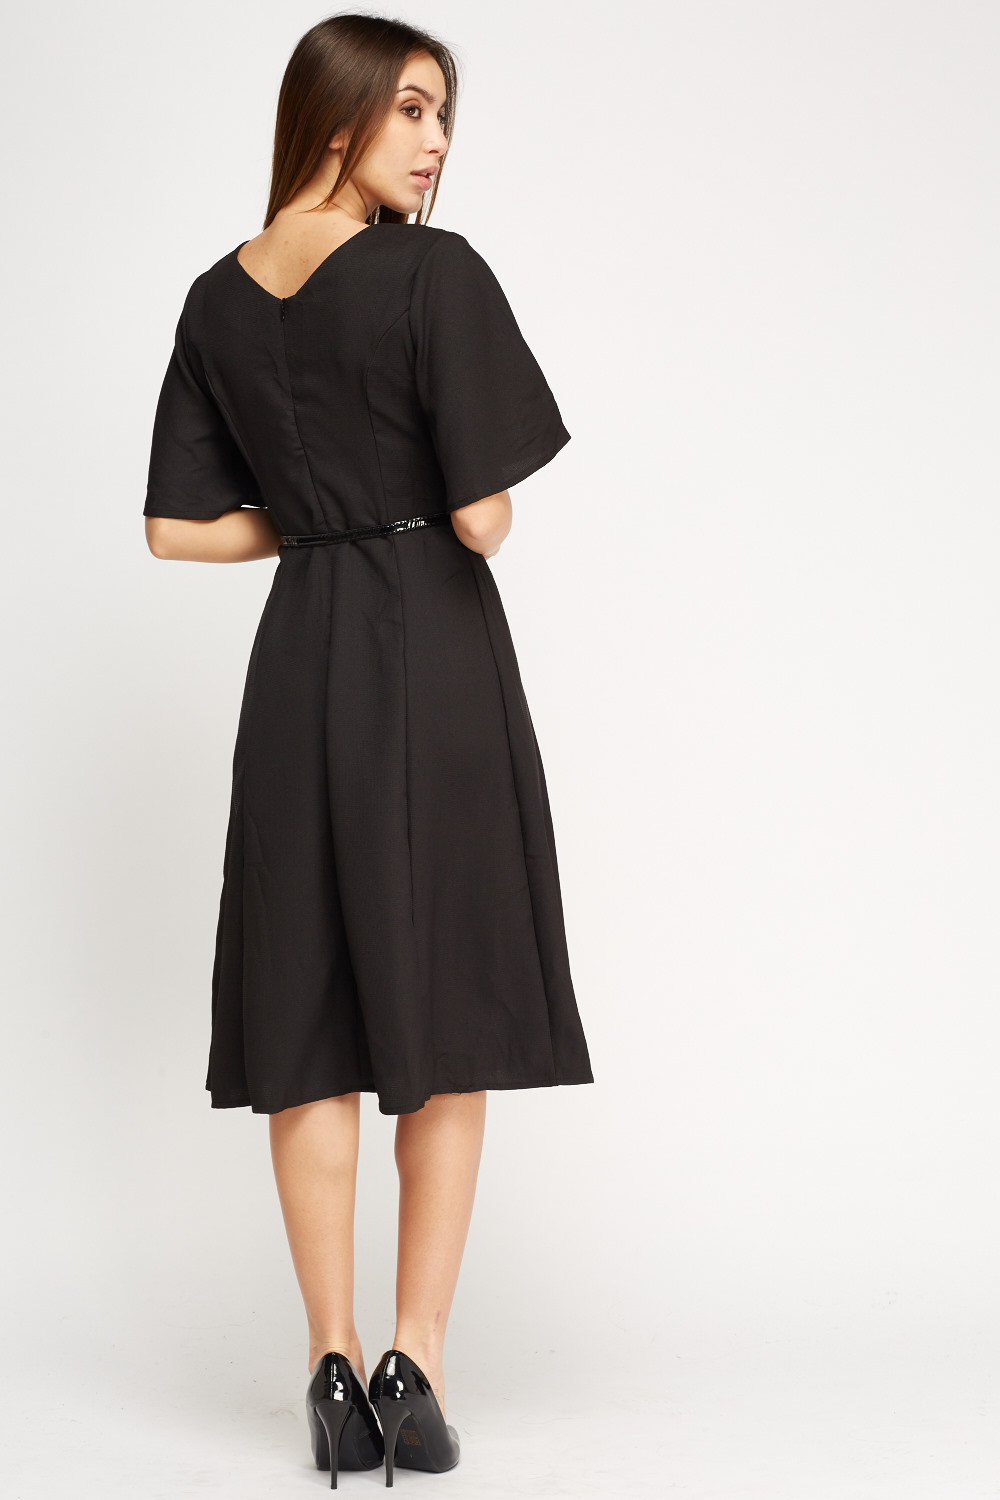 Textured Belted Swing Dress - Just $3